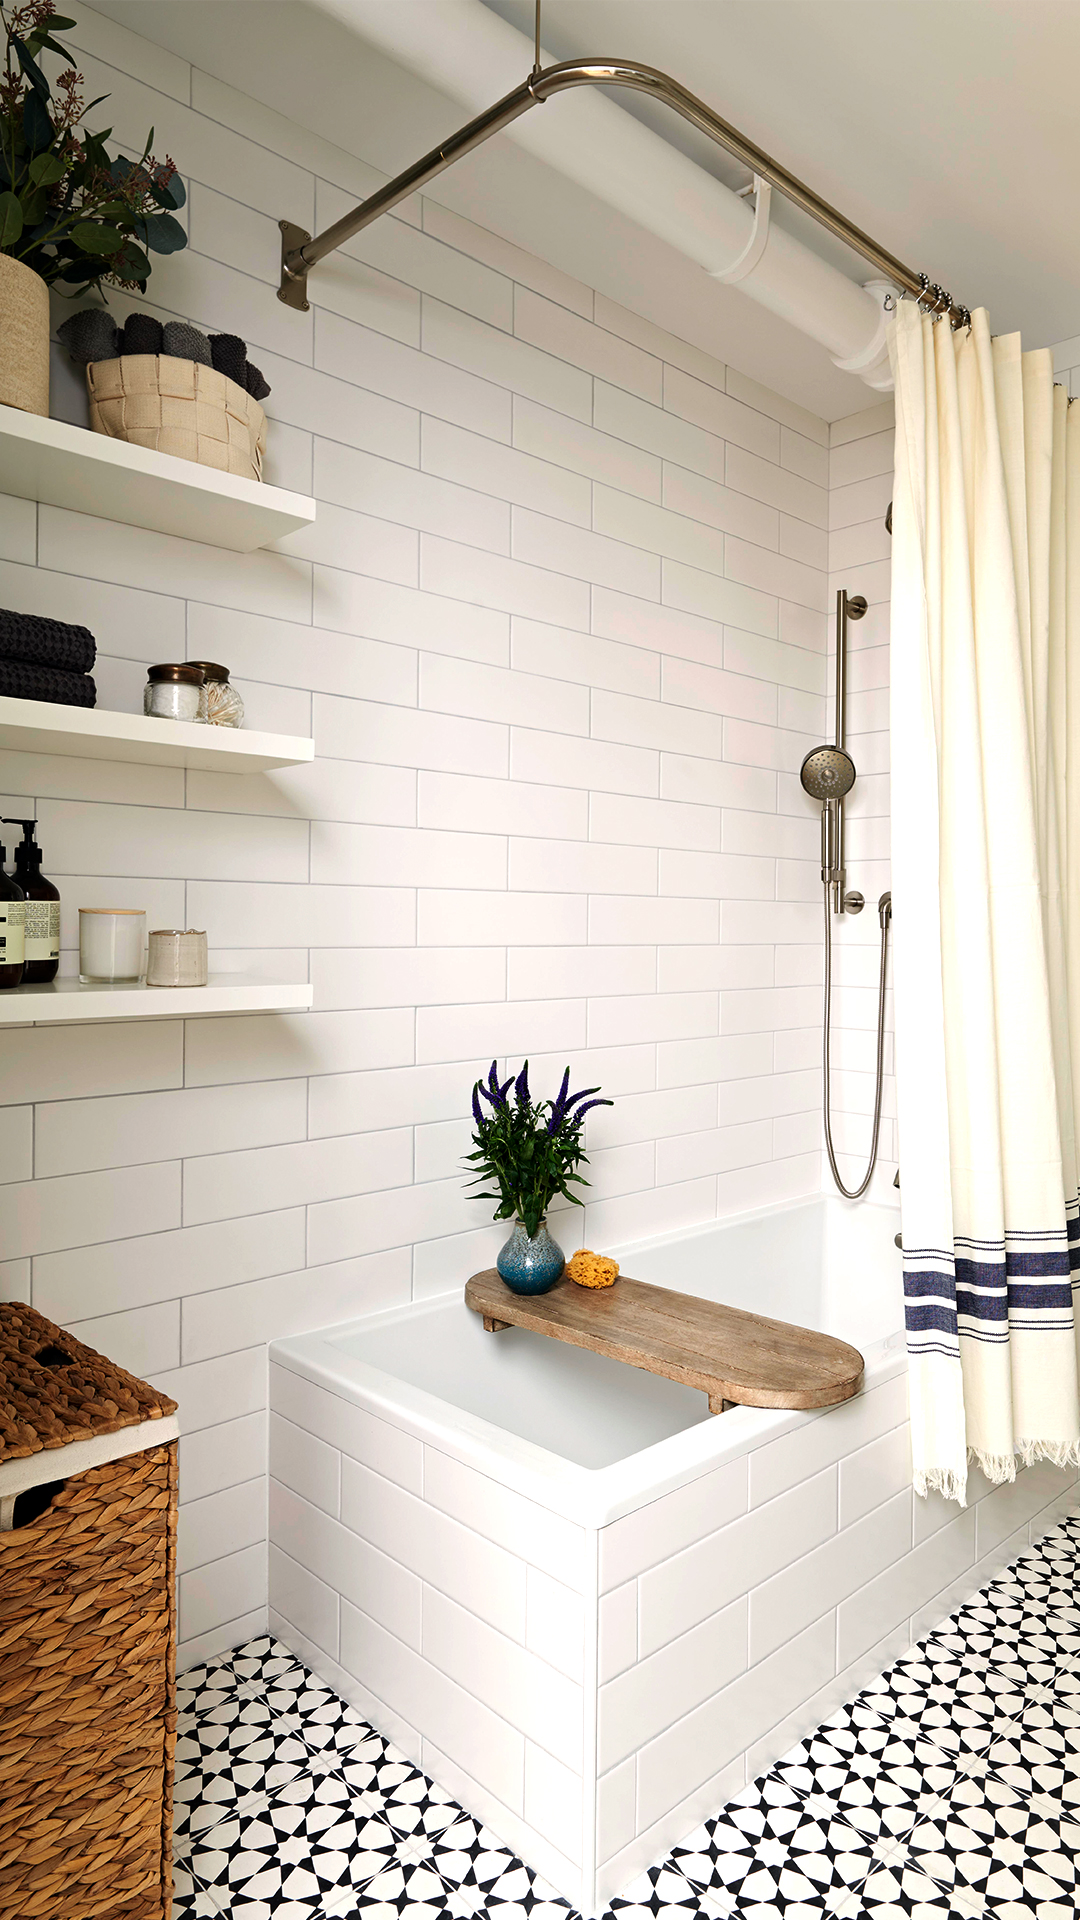 How to retile tile your bathroom wall